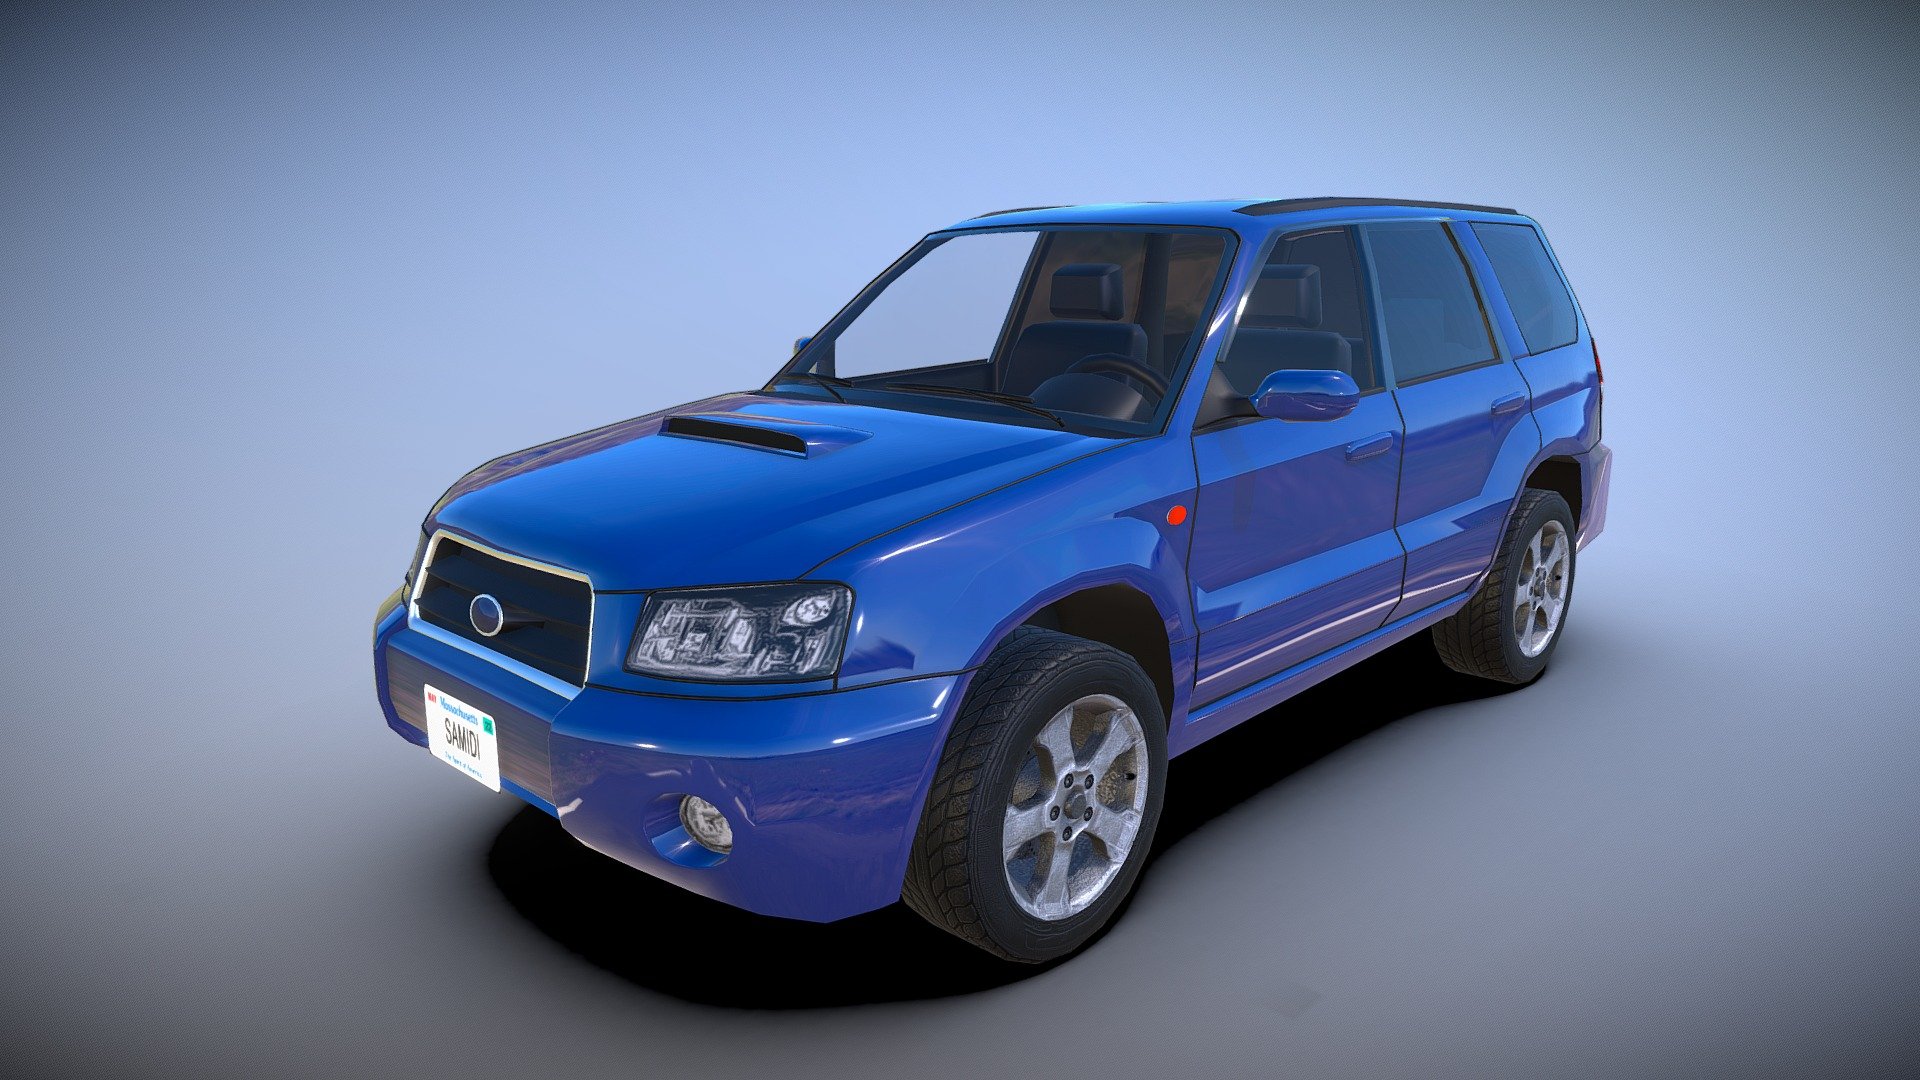 Low Poly model ready for use in Unity, UE (direction,transform,normals, tris).
* Body 17k tris, 10k vert
* Wheels 6k tris, 3.5 vert
* Interior 8k tris, 4k vert

Separated wheels, interior, steering wheel, index dashboard, whashers

For all questions contact cachetf@gmail.com - Subaru Forester SG 03-08 - 3D model by Samidi (@cachetf) 3d model